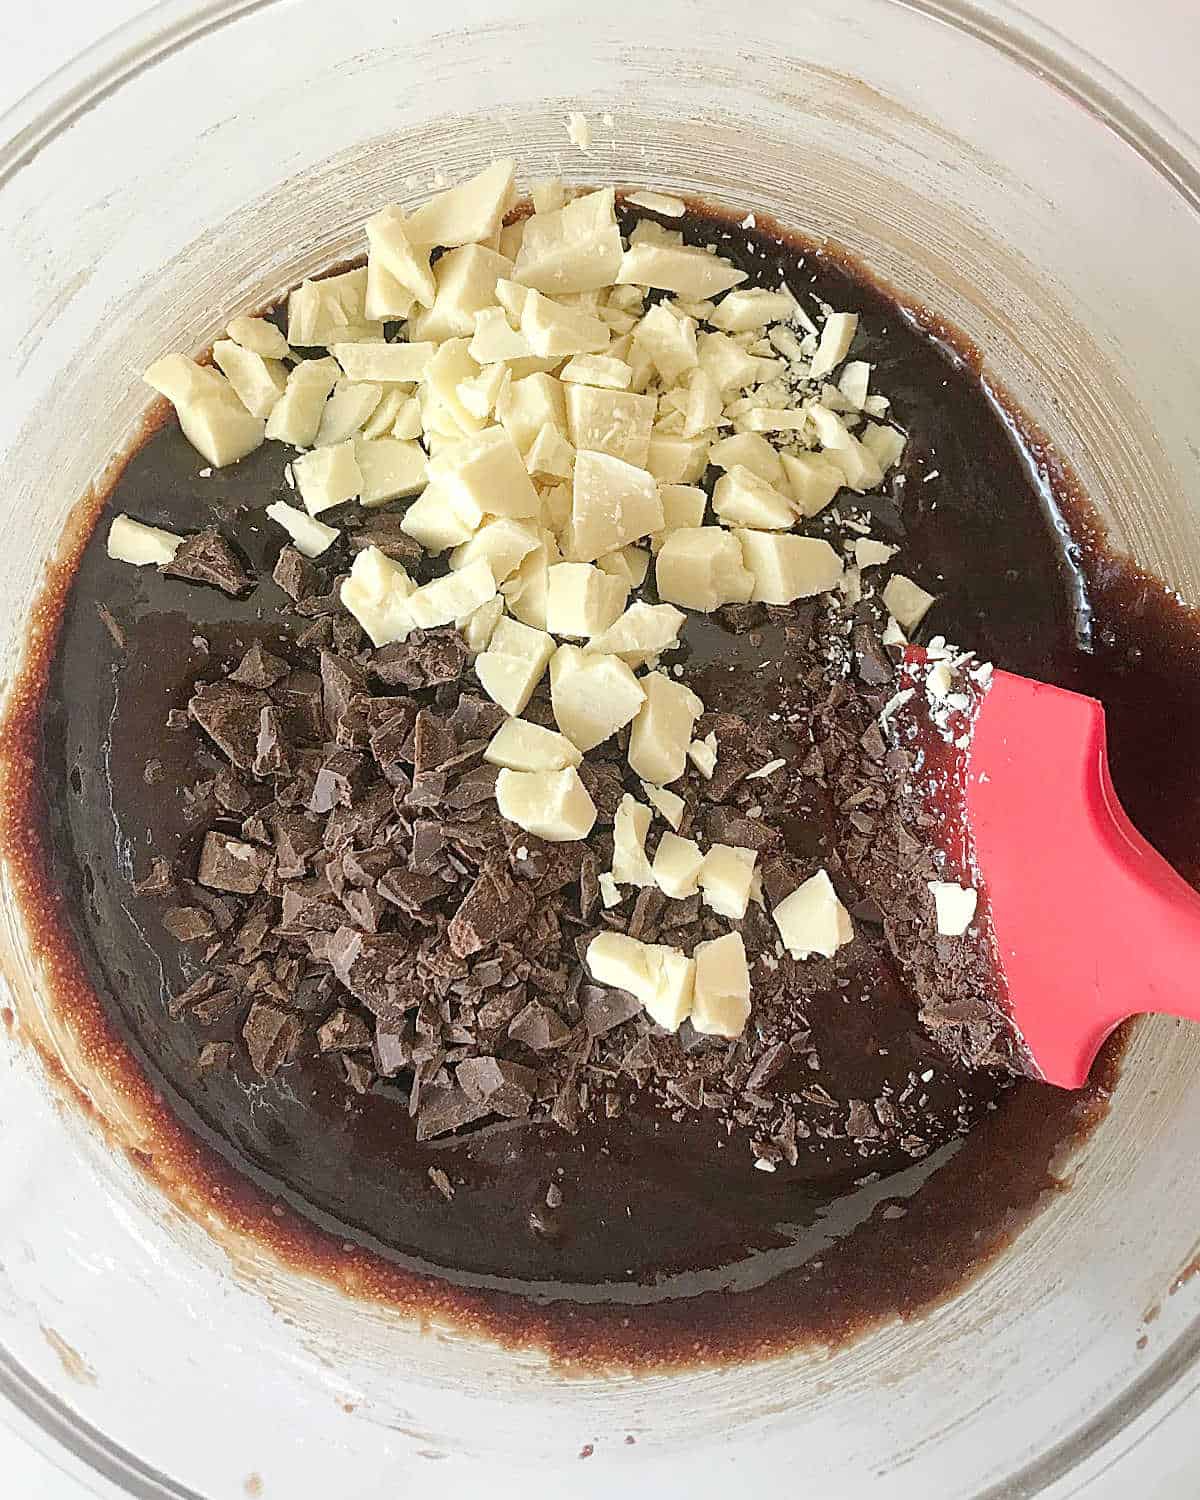 White and dark chocolate chunks added to brownie batter in a glass bowl. Red spatula. White surface.